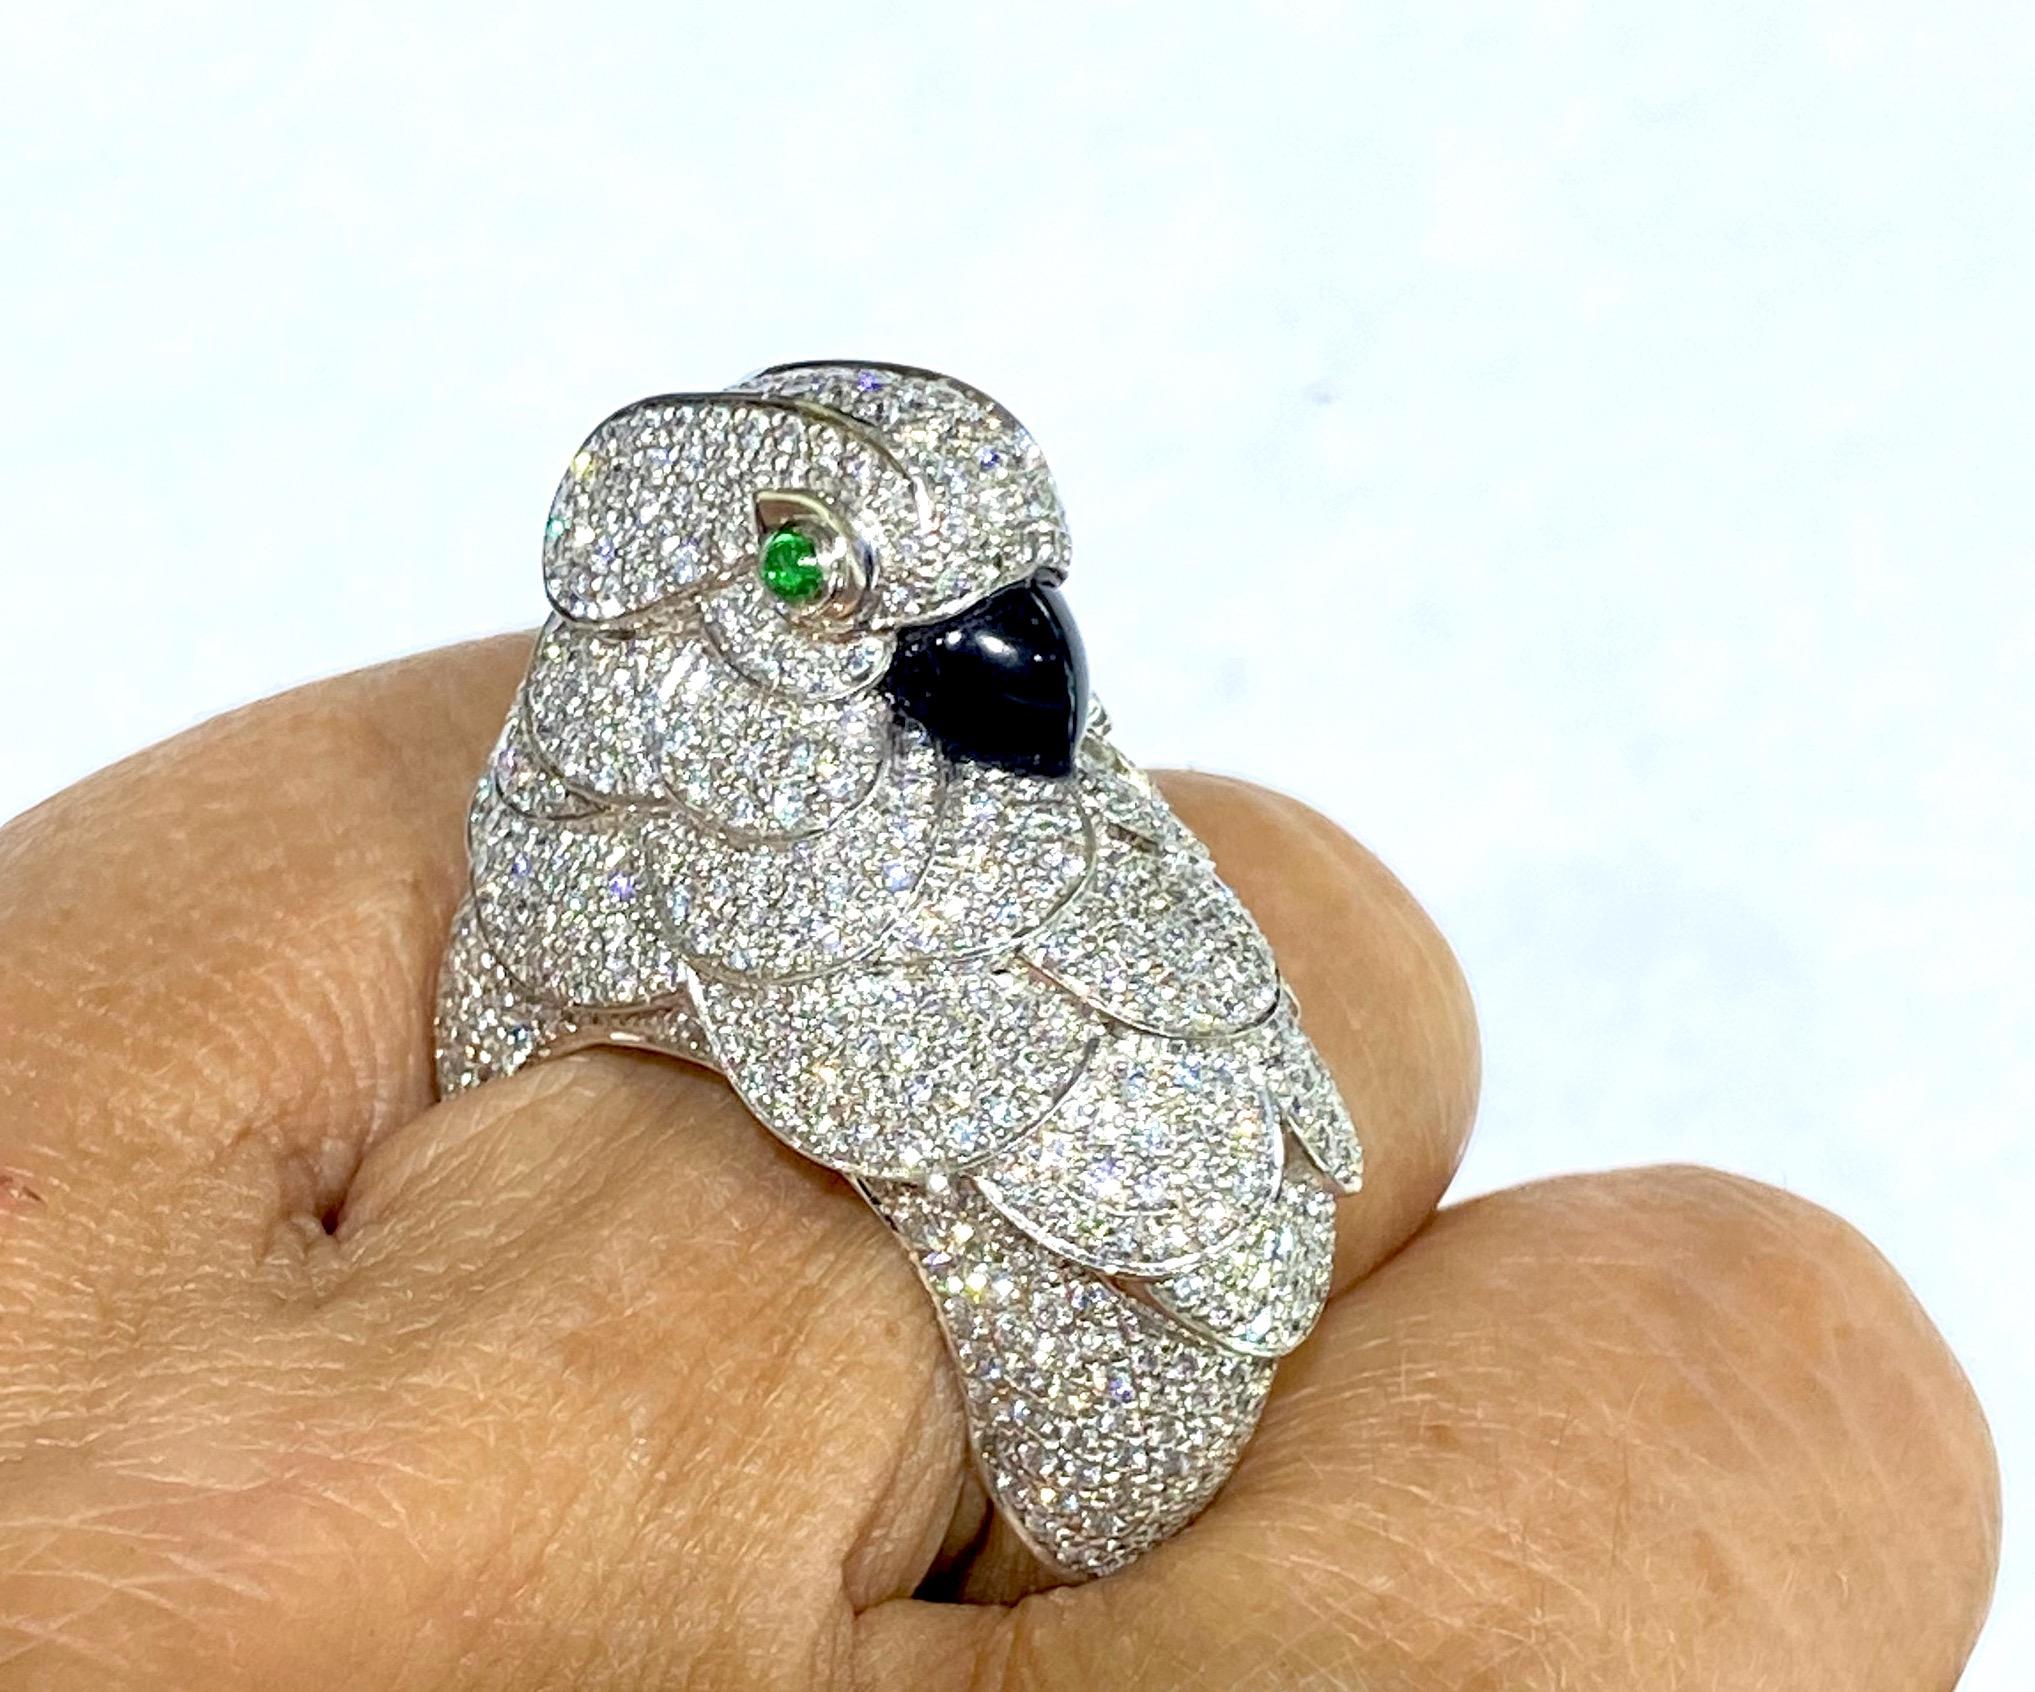 Round Cut 3 Carat Diamond Parrot Statement Ring with Emeralds and Black Onyx